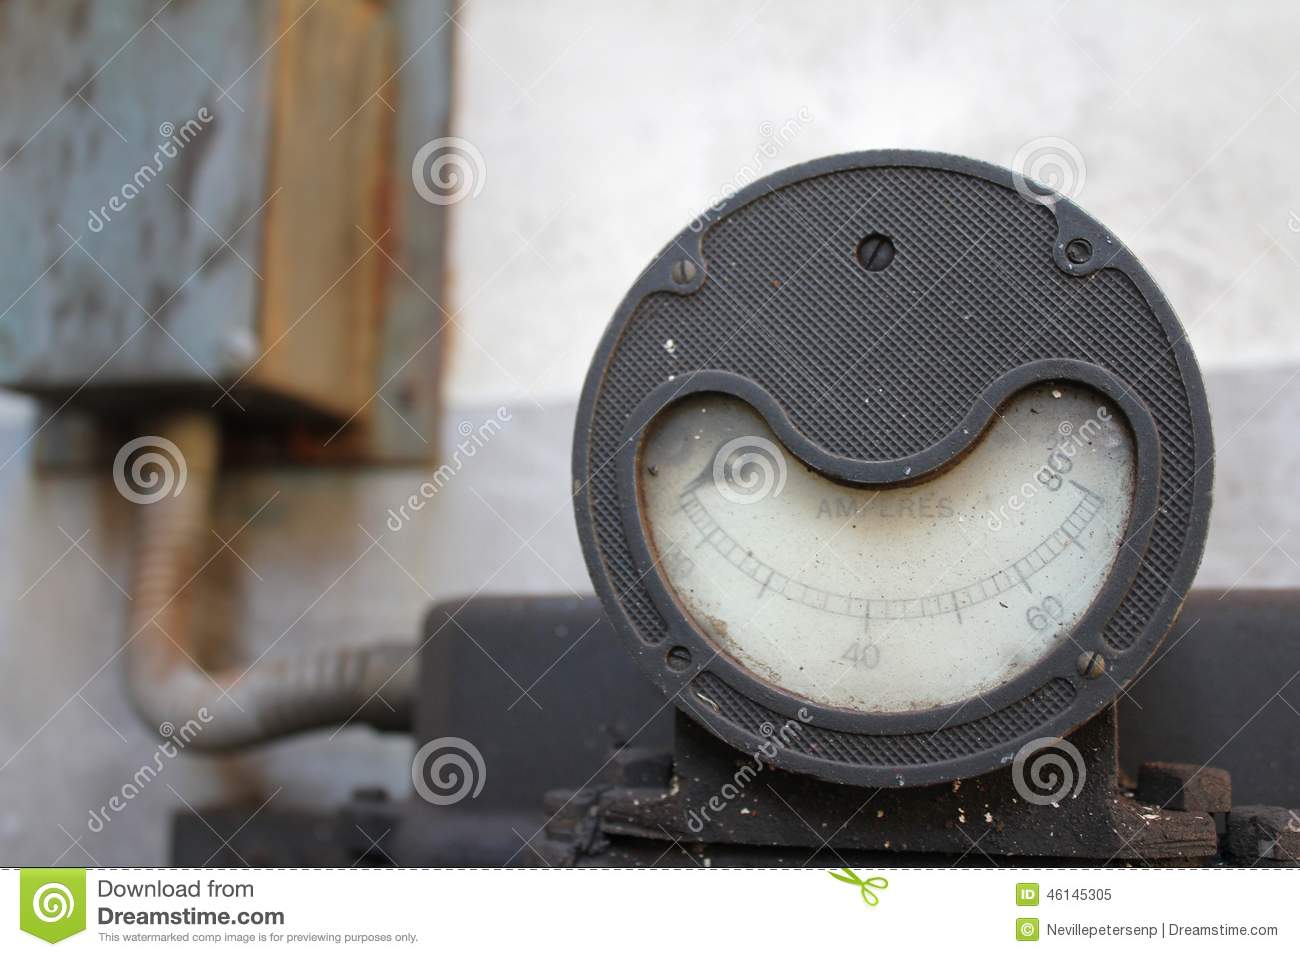 An Old Amp Meter With A Textured Metal Plate And Wide Smile Shape    